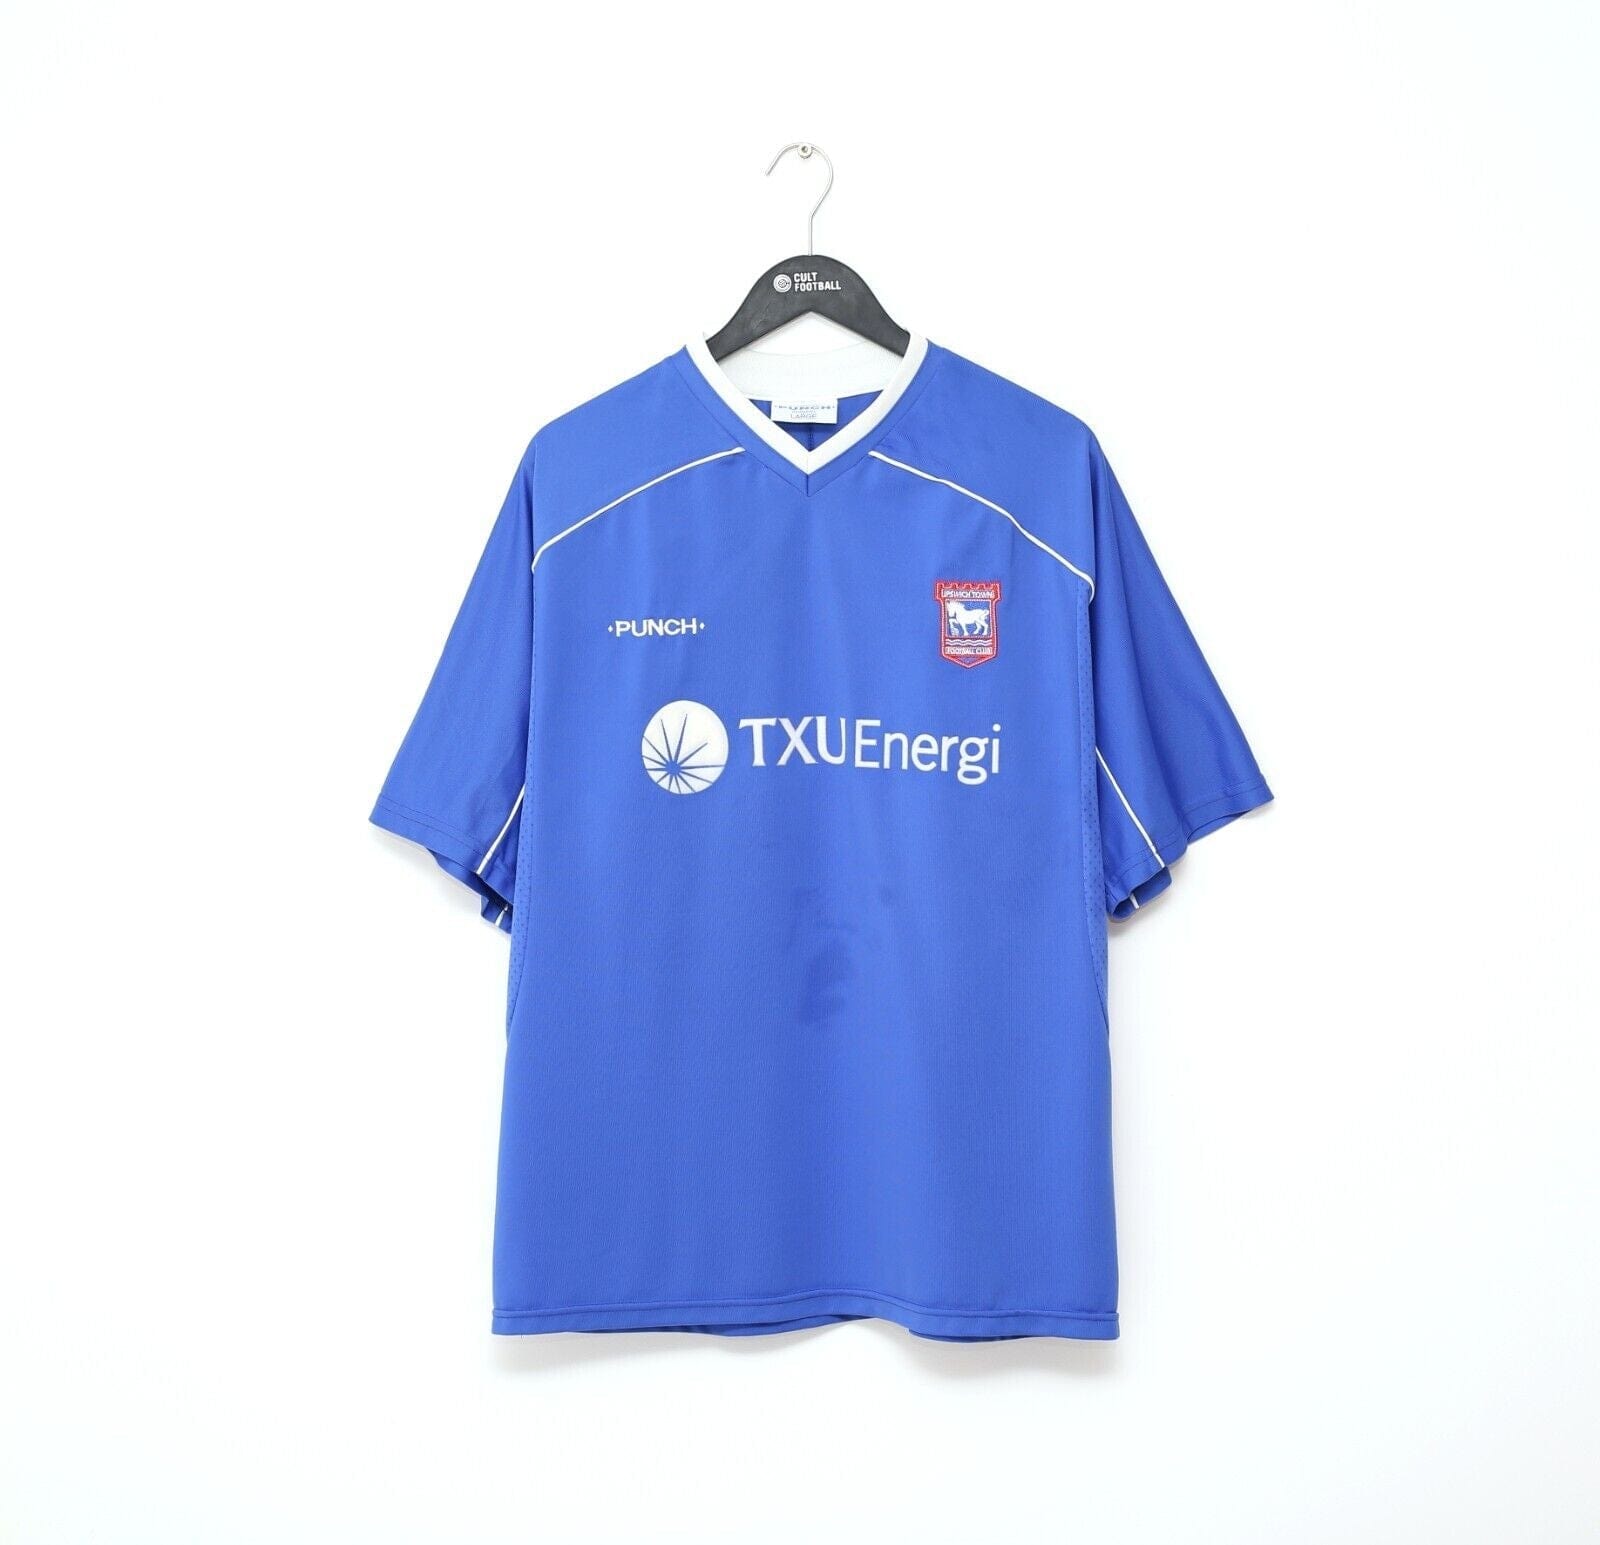 2001/02 GEORGE #33 Ipswich Town Vintage PUNCH UEFA Cup Football Shirt Jersey (L)